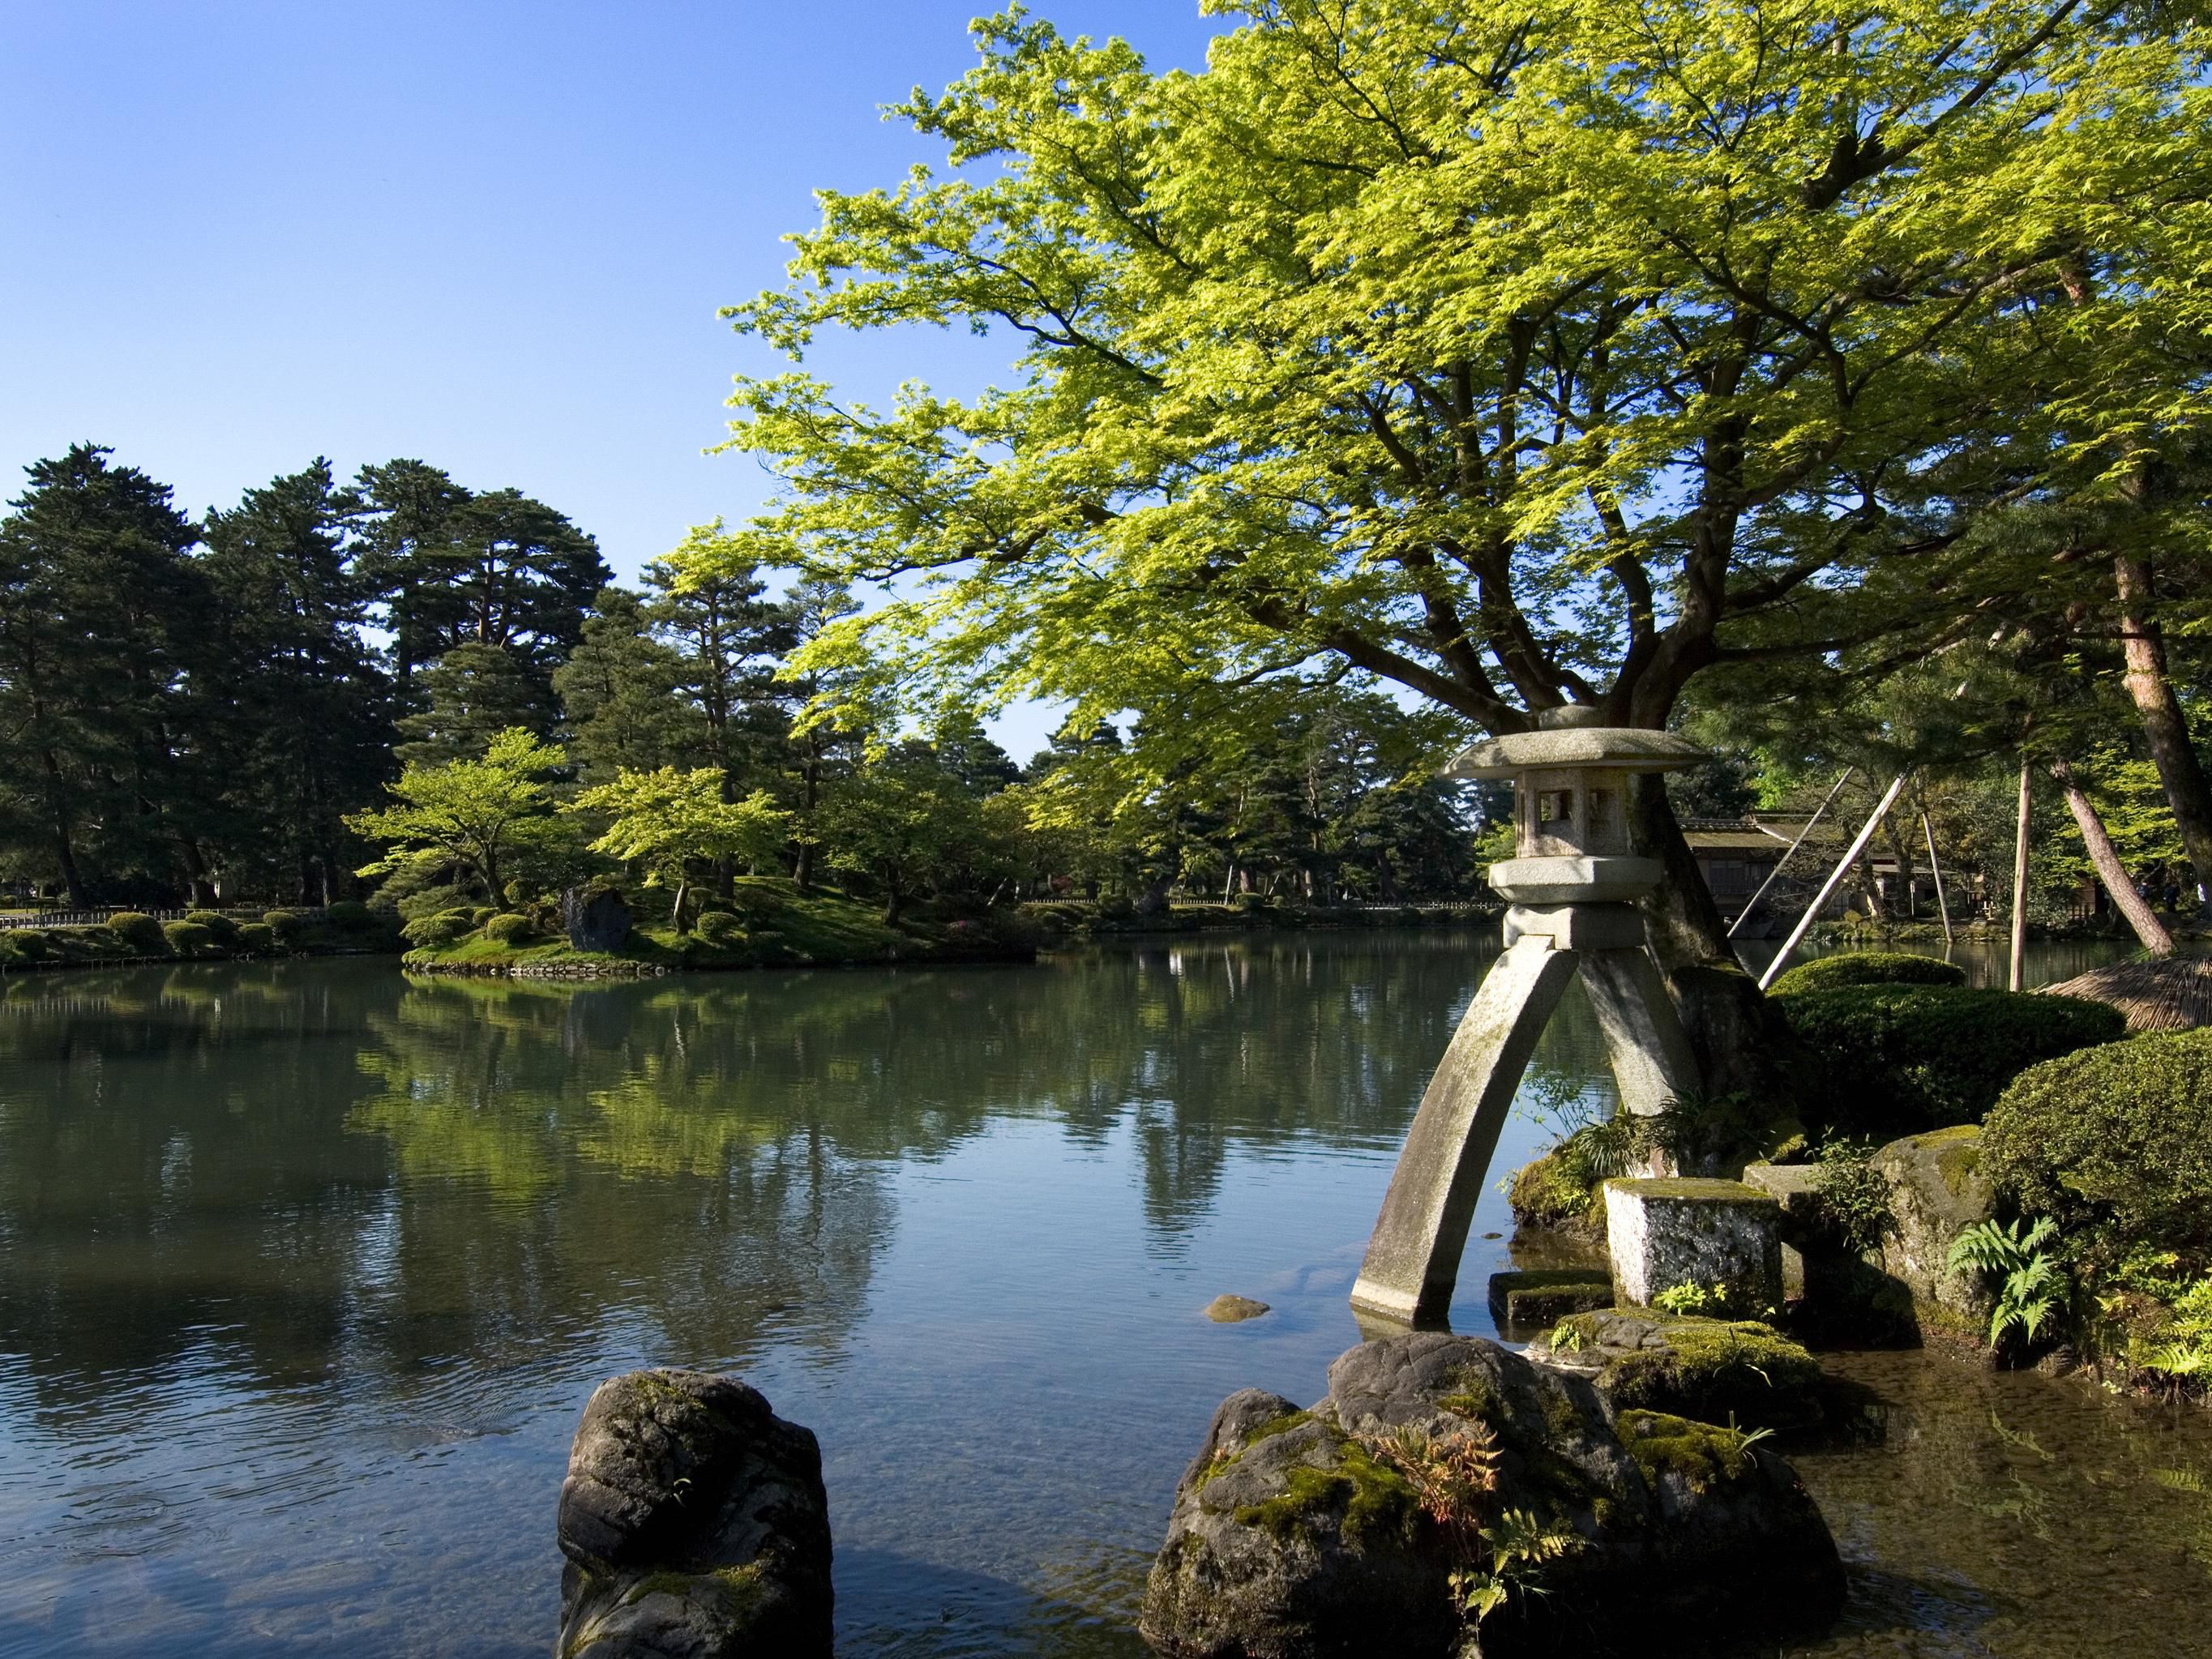 Kenrokuen is one of the three most famous gardens in Japan. This is a 3-star Michelin-starred sightseeing garden. 
Together with the neighboring Kanazawa Castle Park, it is a popular destination for tourists from Japan and around the world.